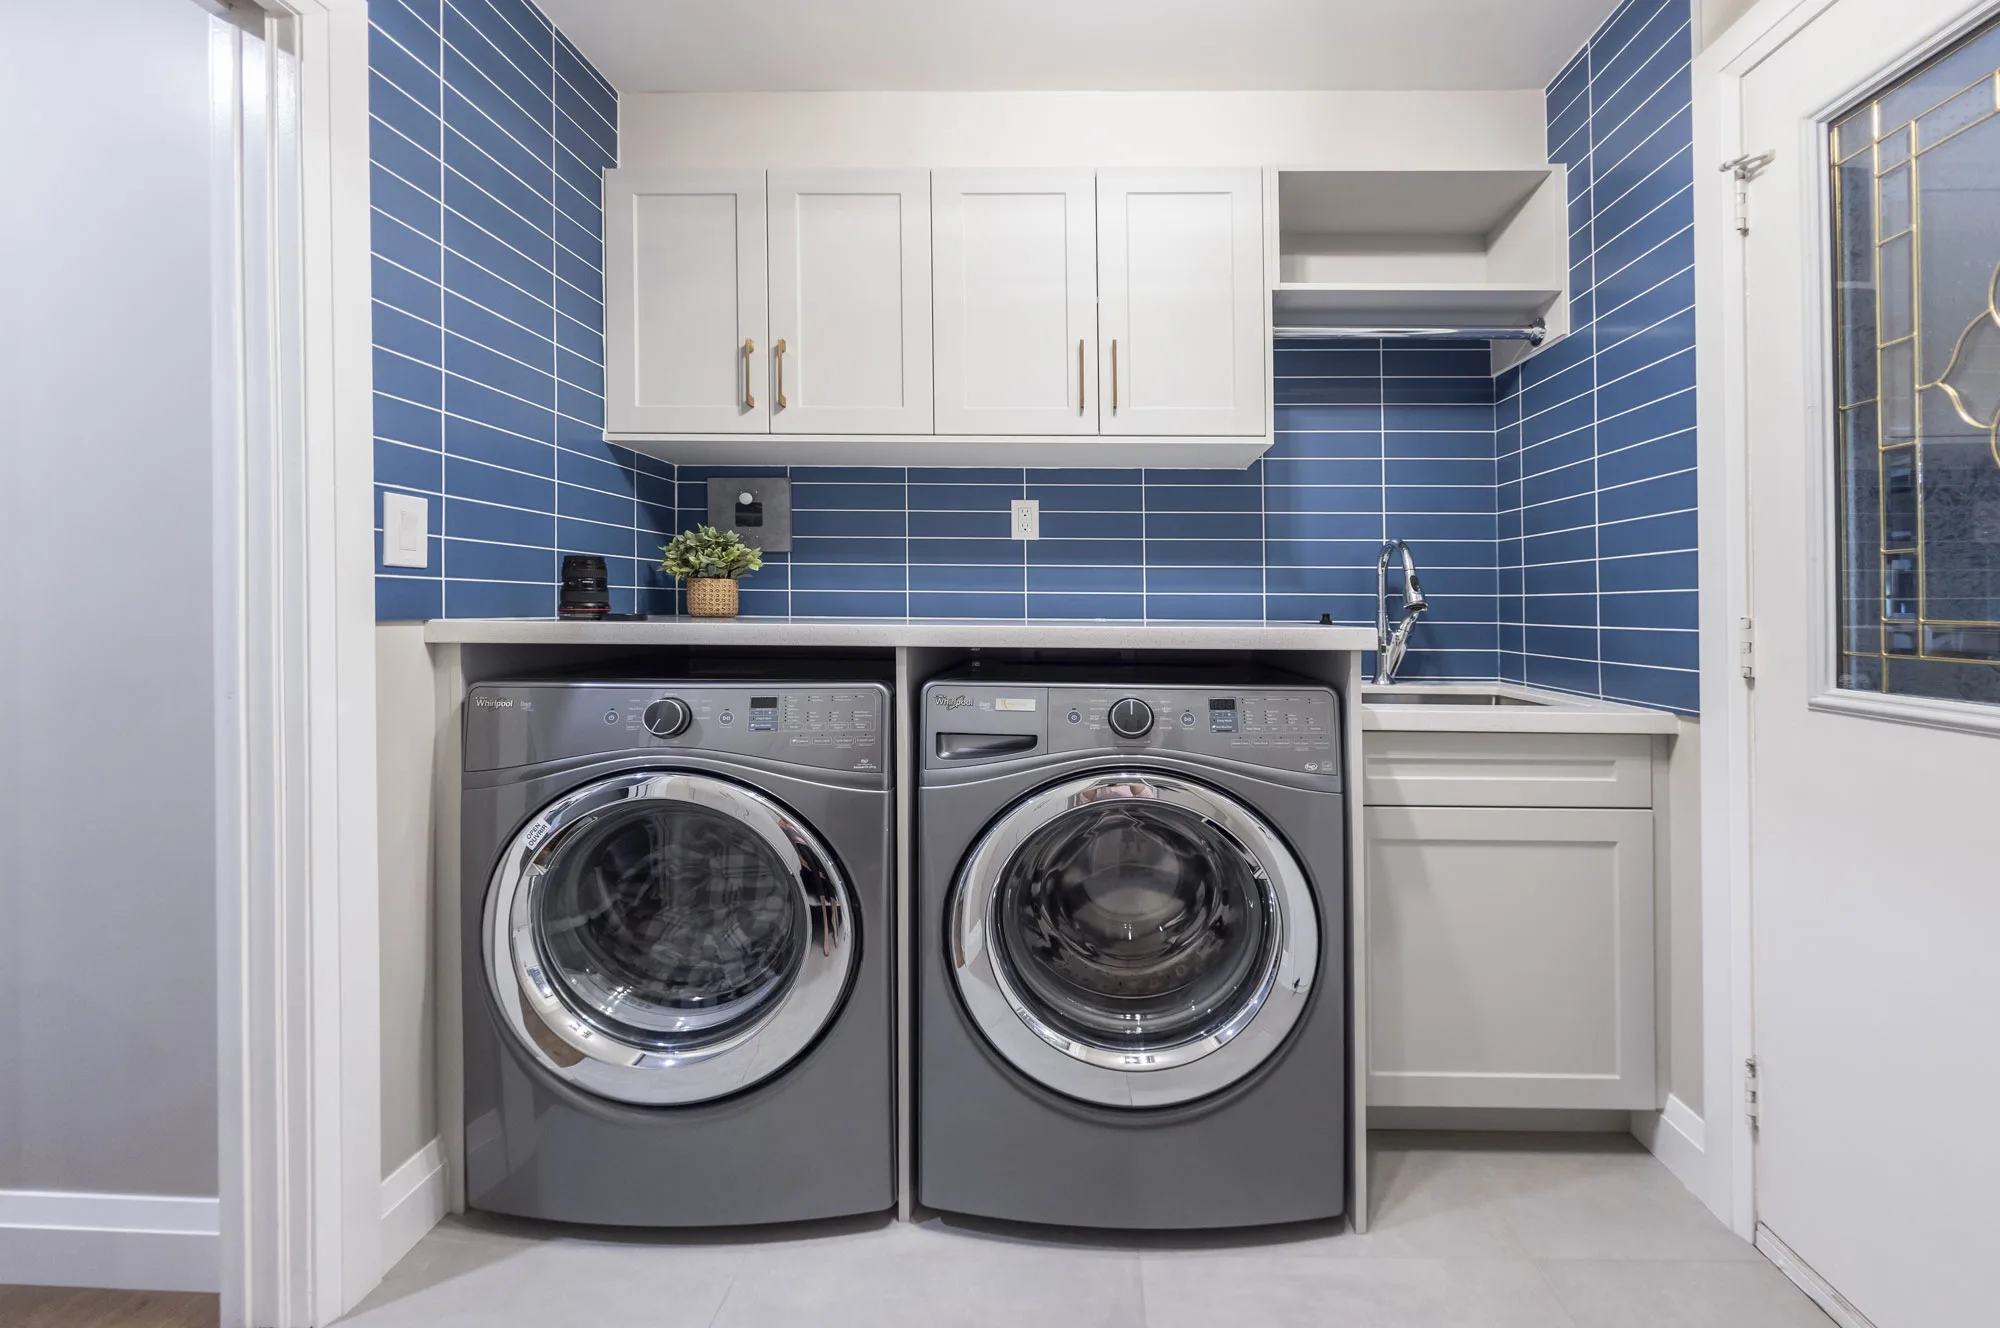 A small laundry room area with stainless steel washer and dryer with a blue subway tile back splash and white cabinets over top